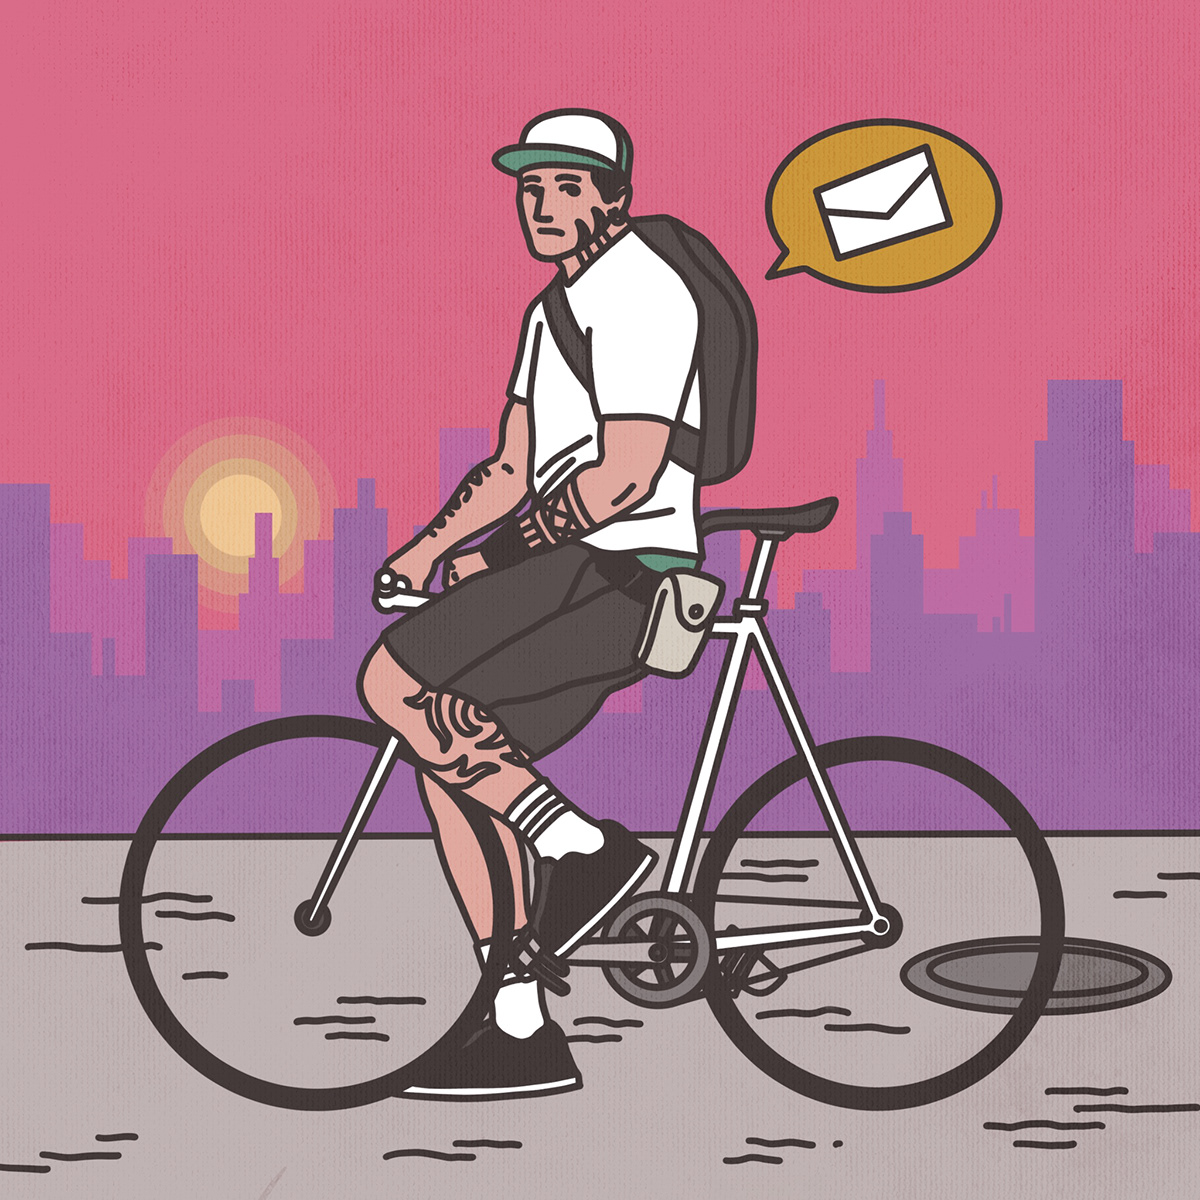 bboying breaking fixed gear fixie hiphop line illustration oldschool Street subculture